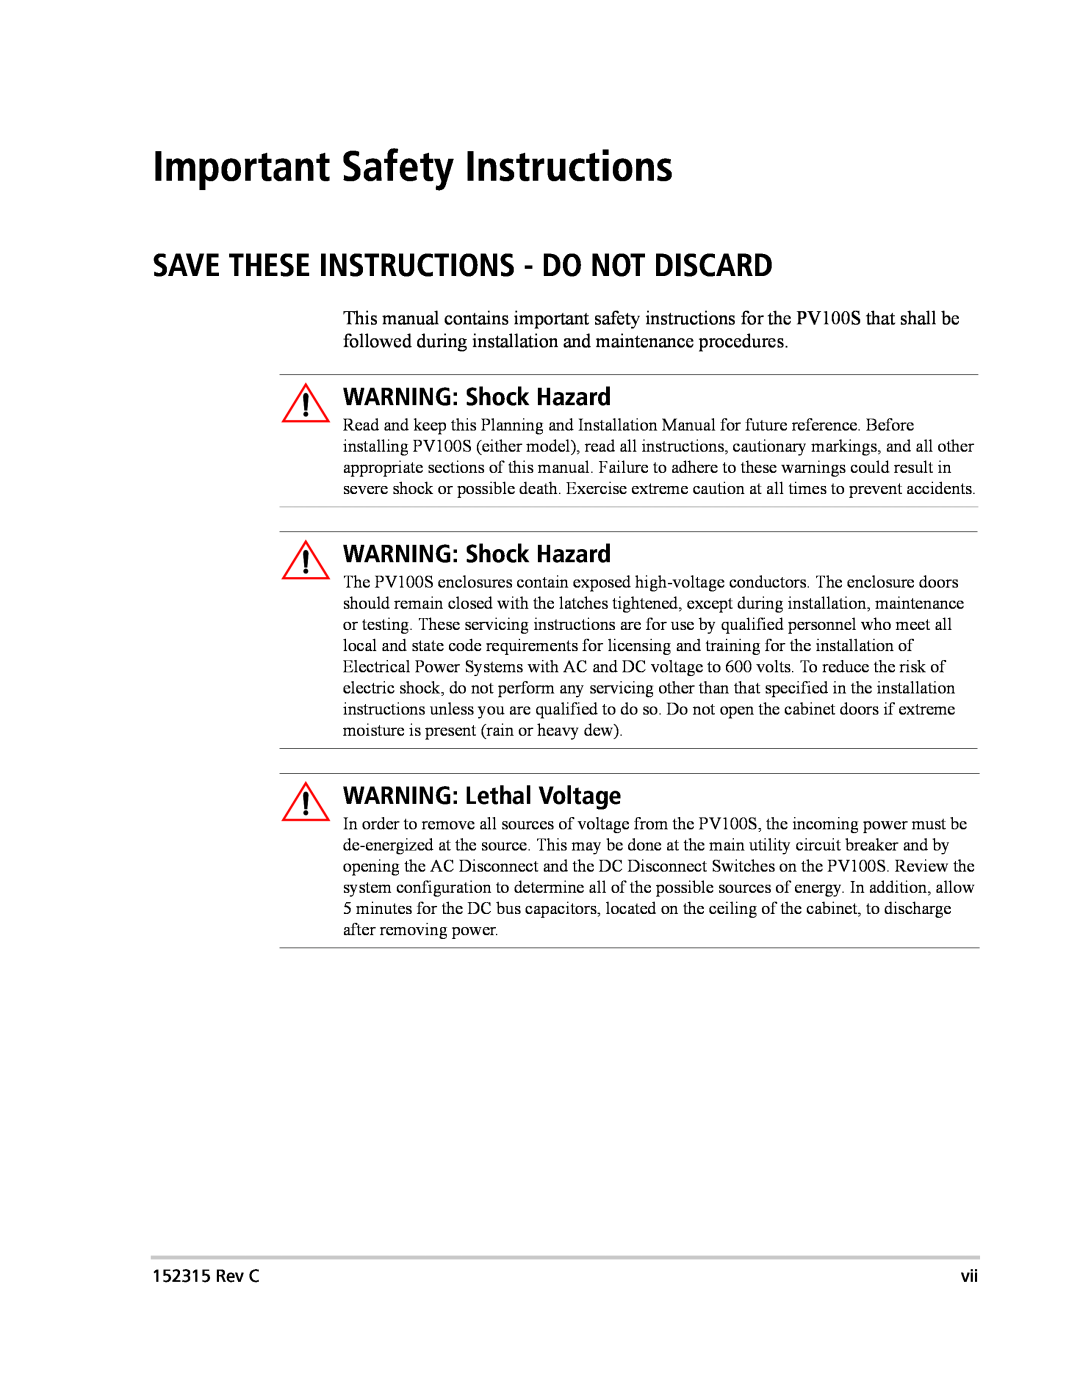 Xantrex Technology PV100S-480 installation manual Important Safety Instructions, Save These Instructions - Do Not Discard 